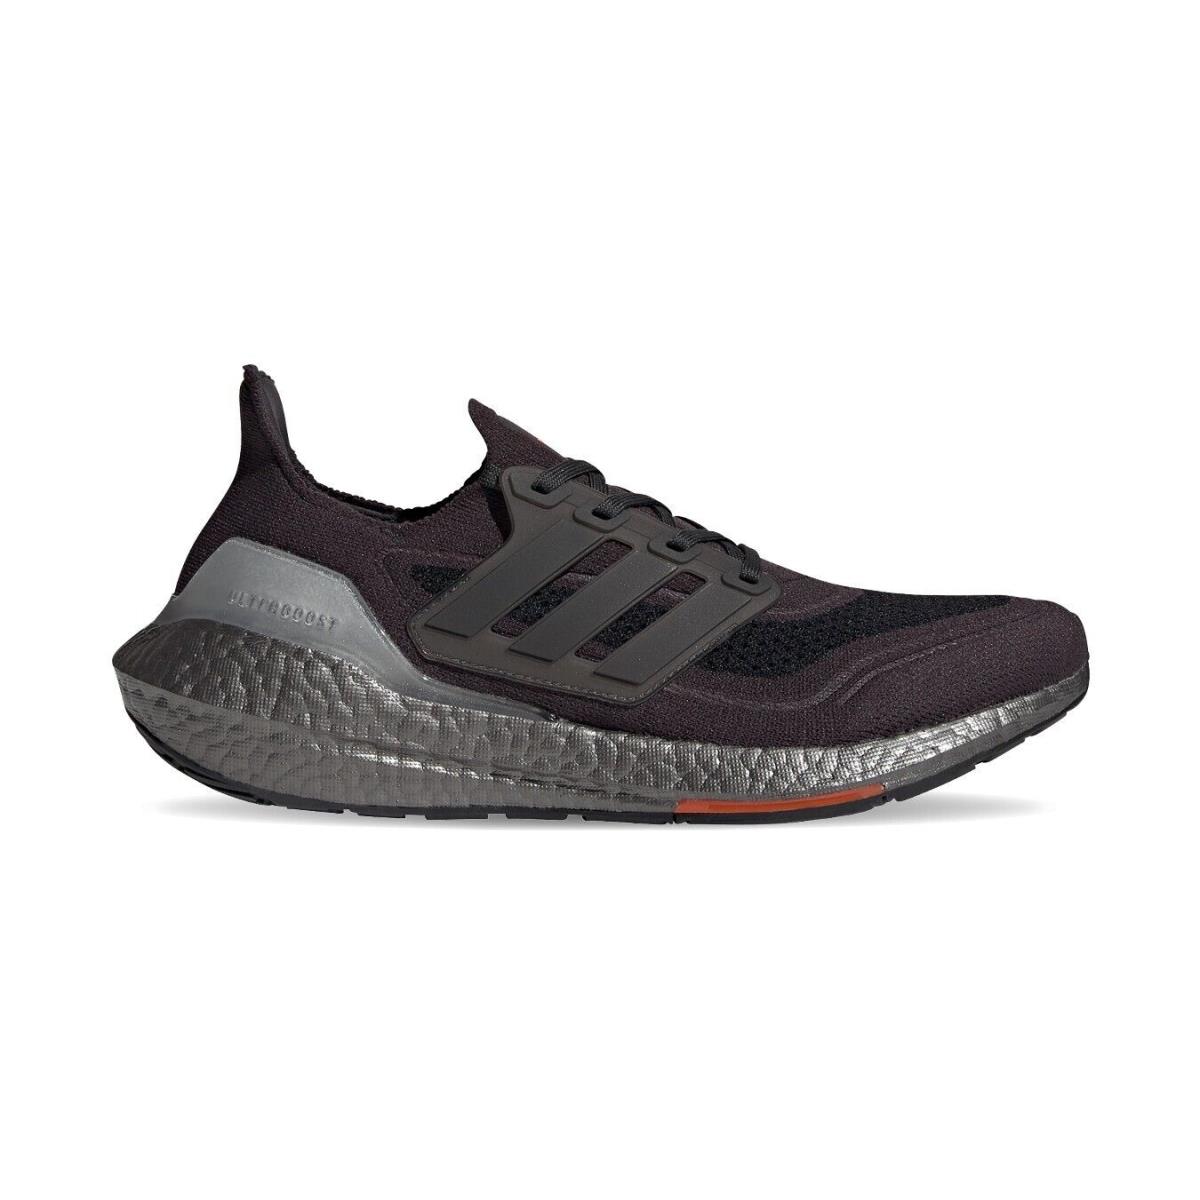 Adidas Ultraboost 21 Shoes Size 6.5M